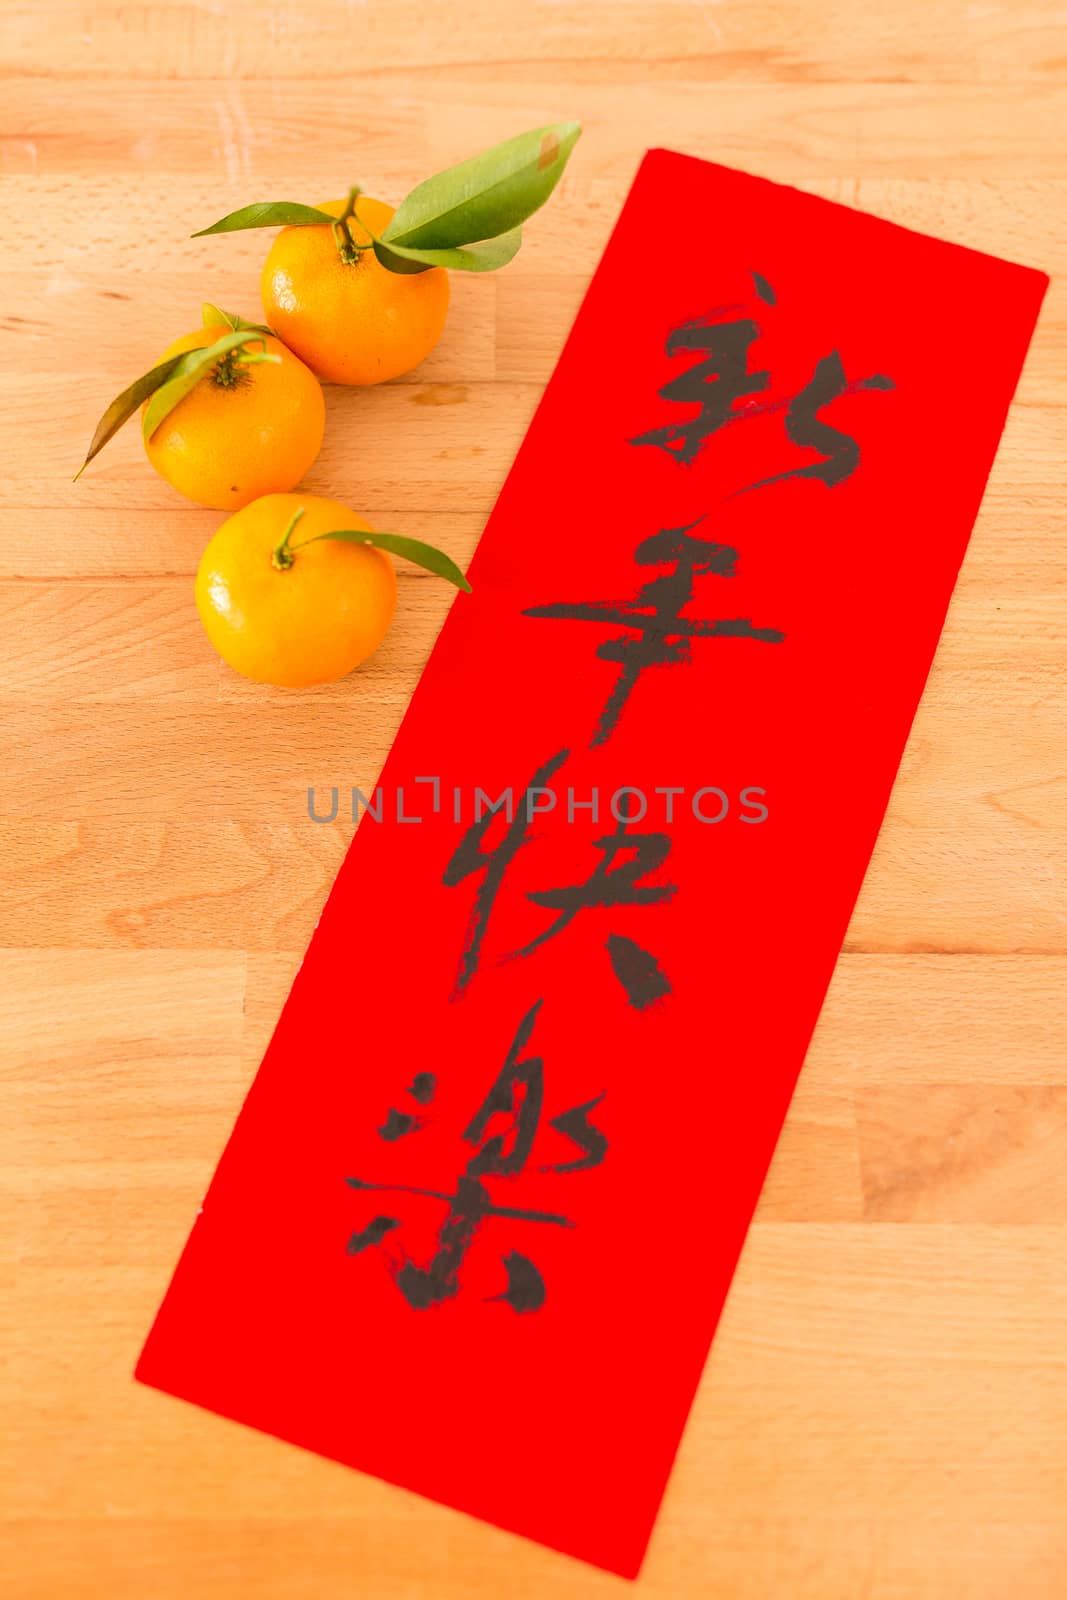 Chinese new year calligraphy, phrase meaning is happy new year